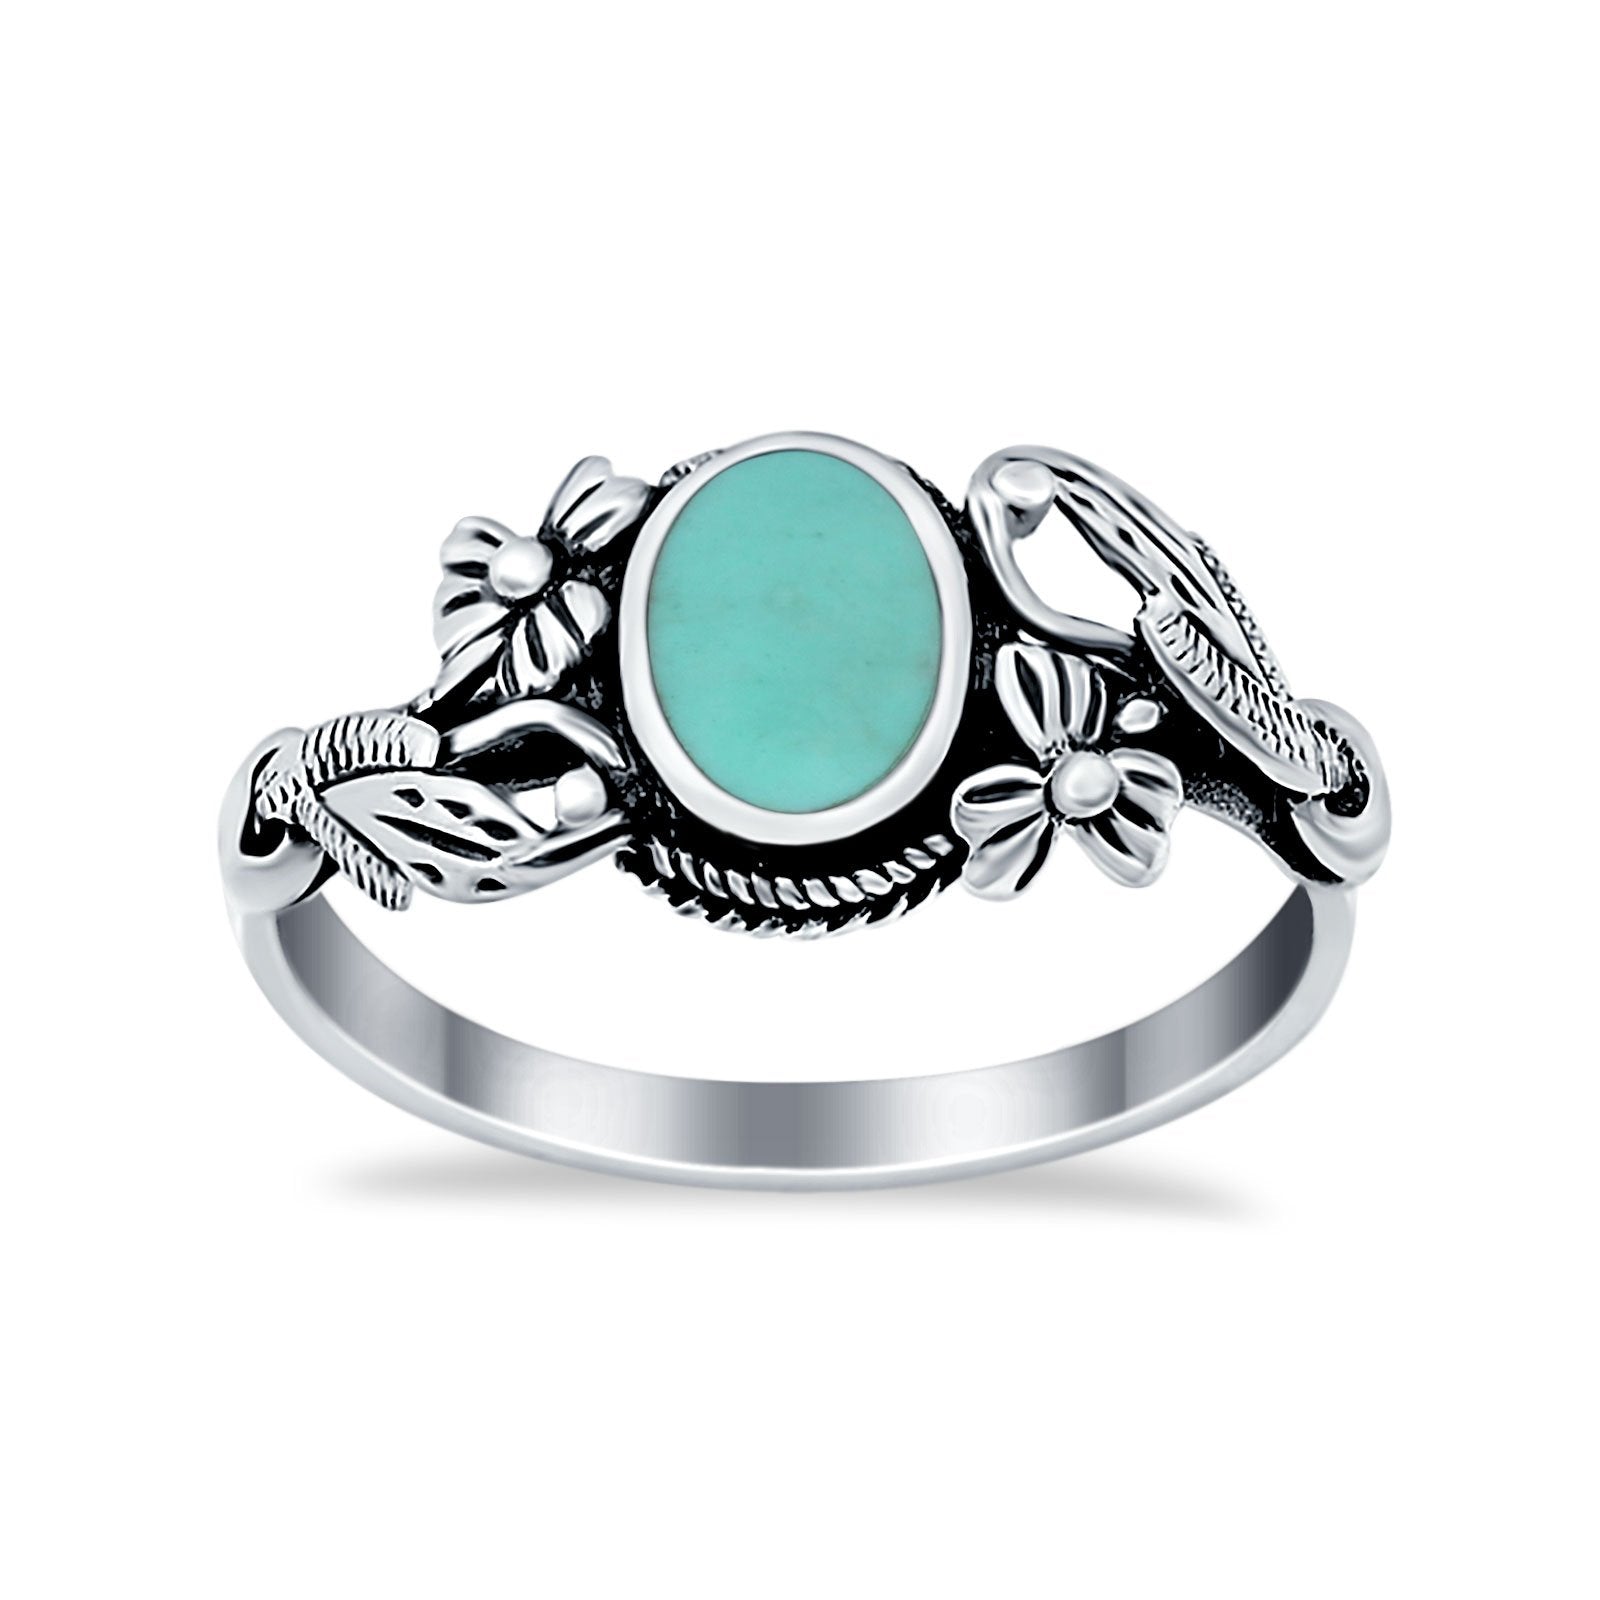 Oxidized Finish Flower Oval Round Simulated Turquoise Ring 925 Sterling Silver